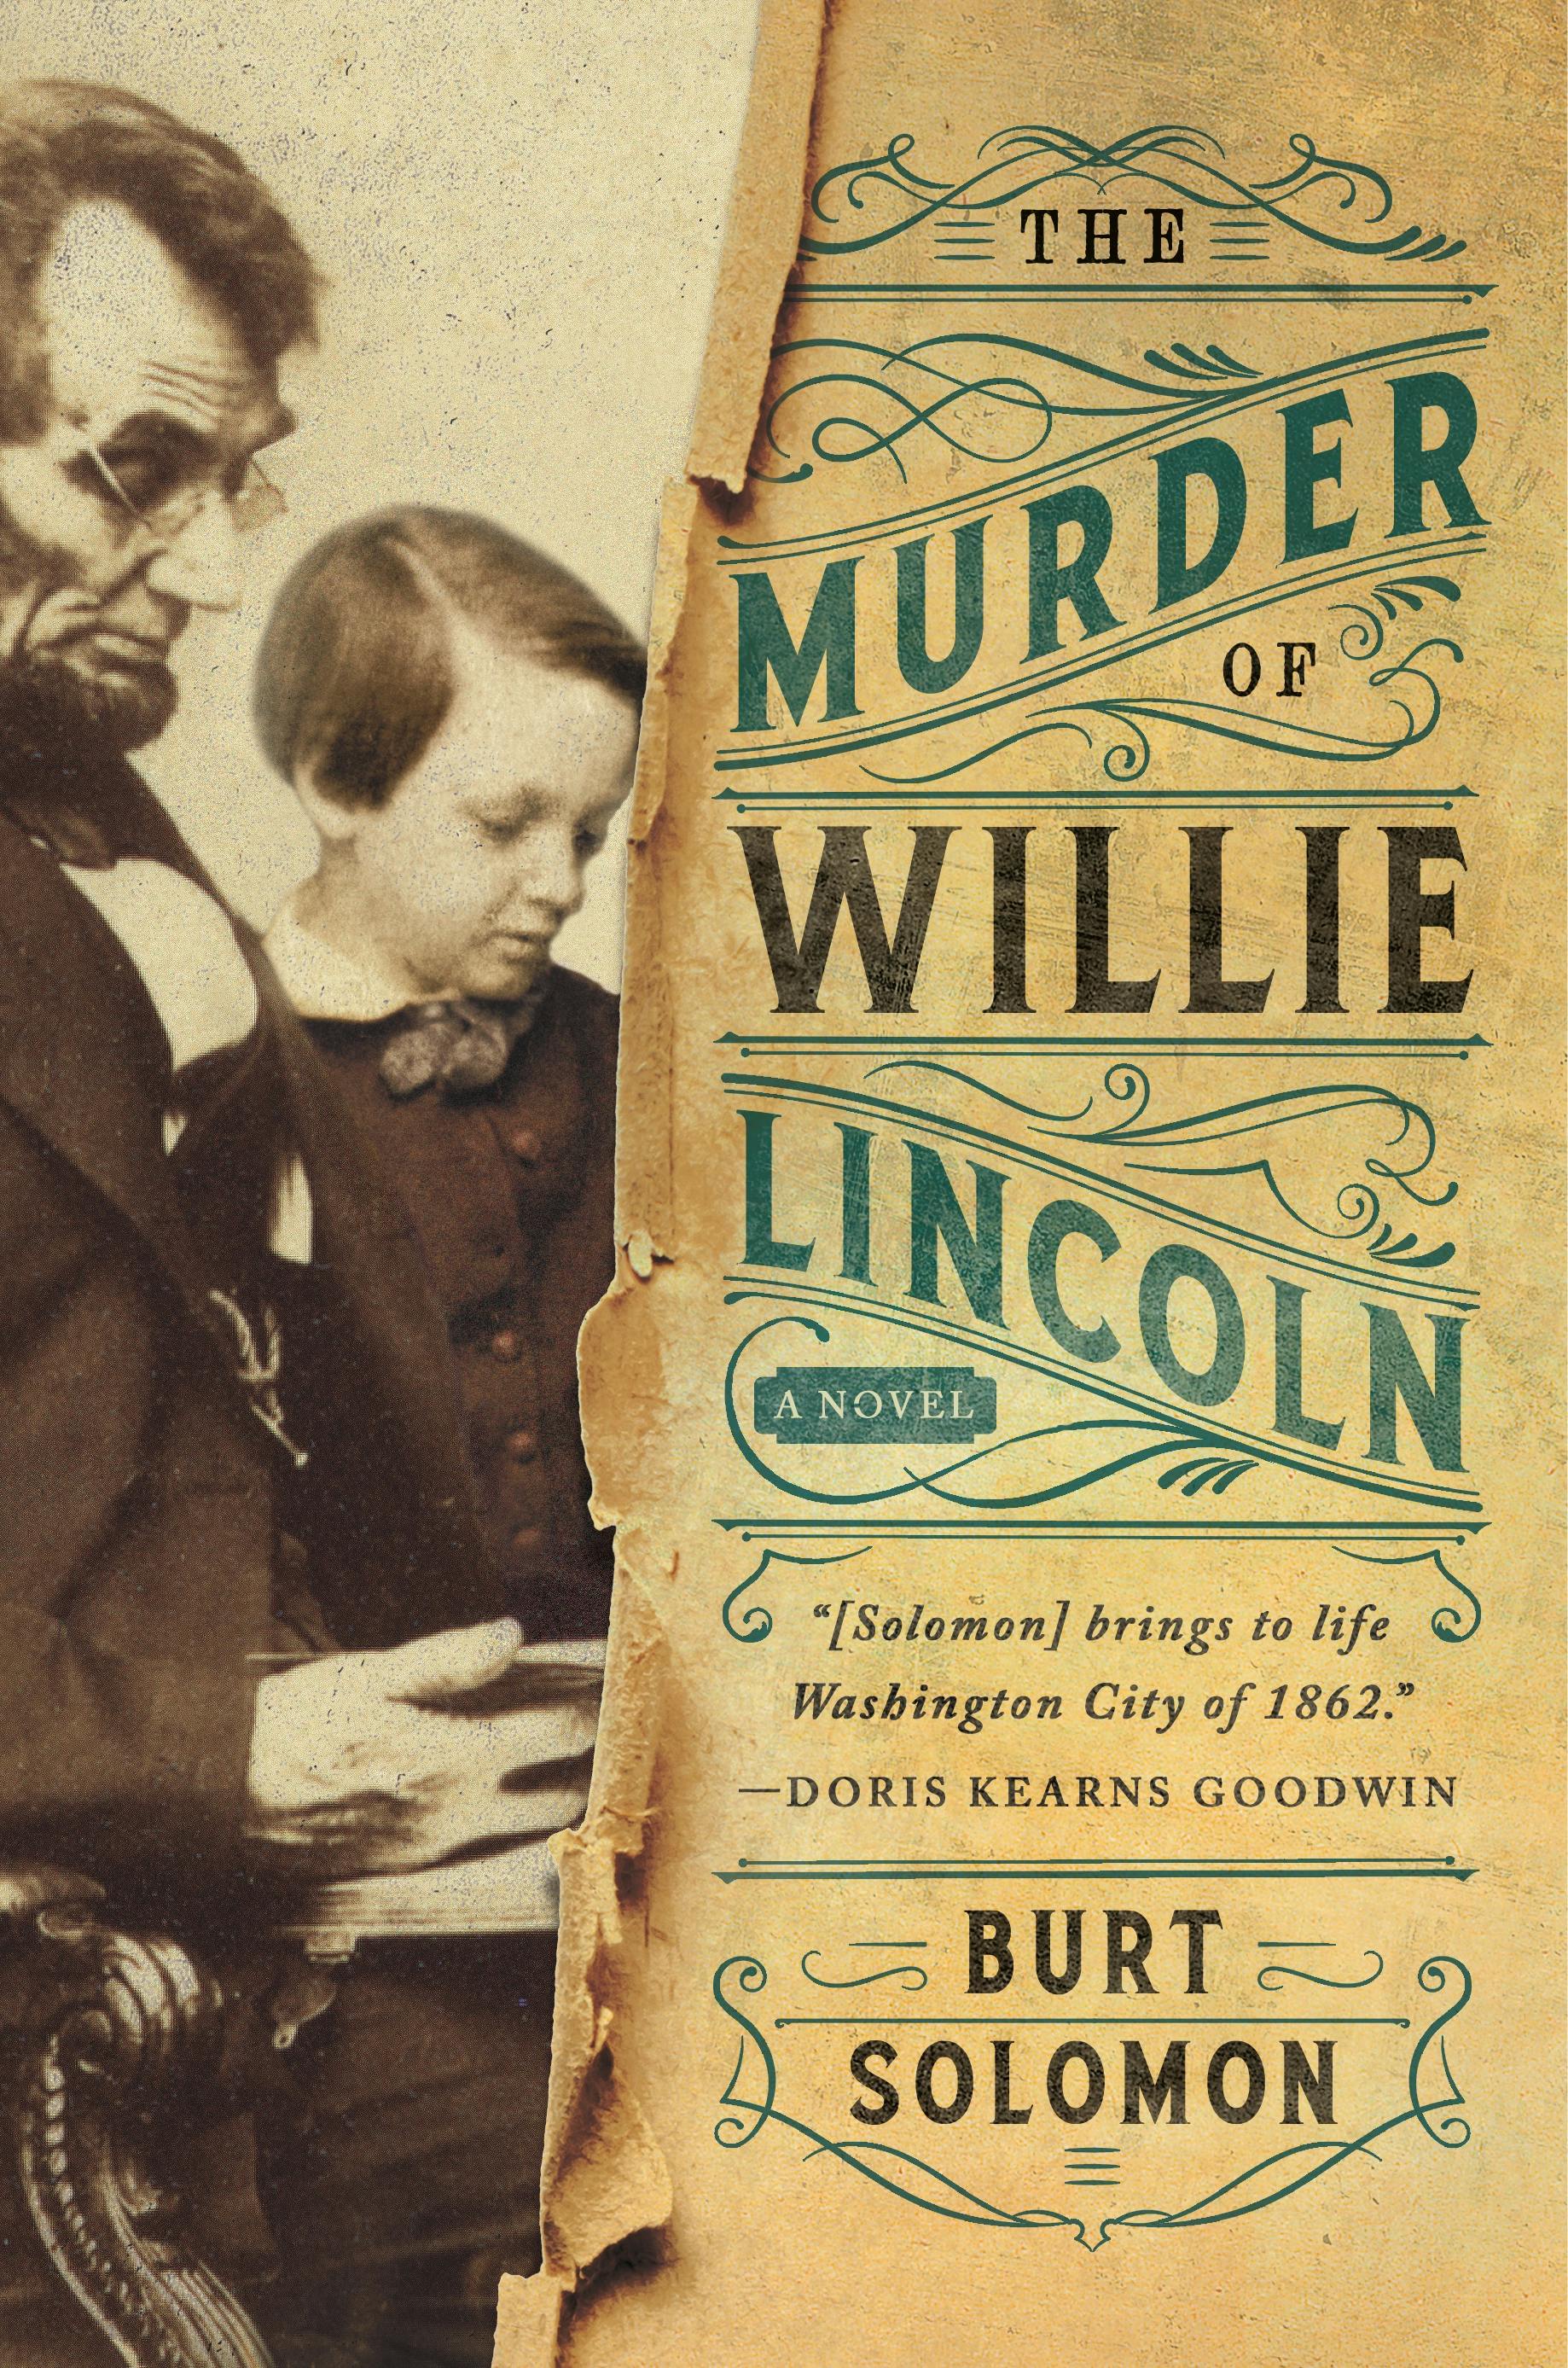 Image of The Murder of Willie Lincoln